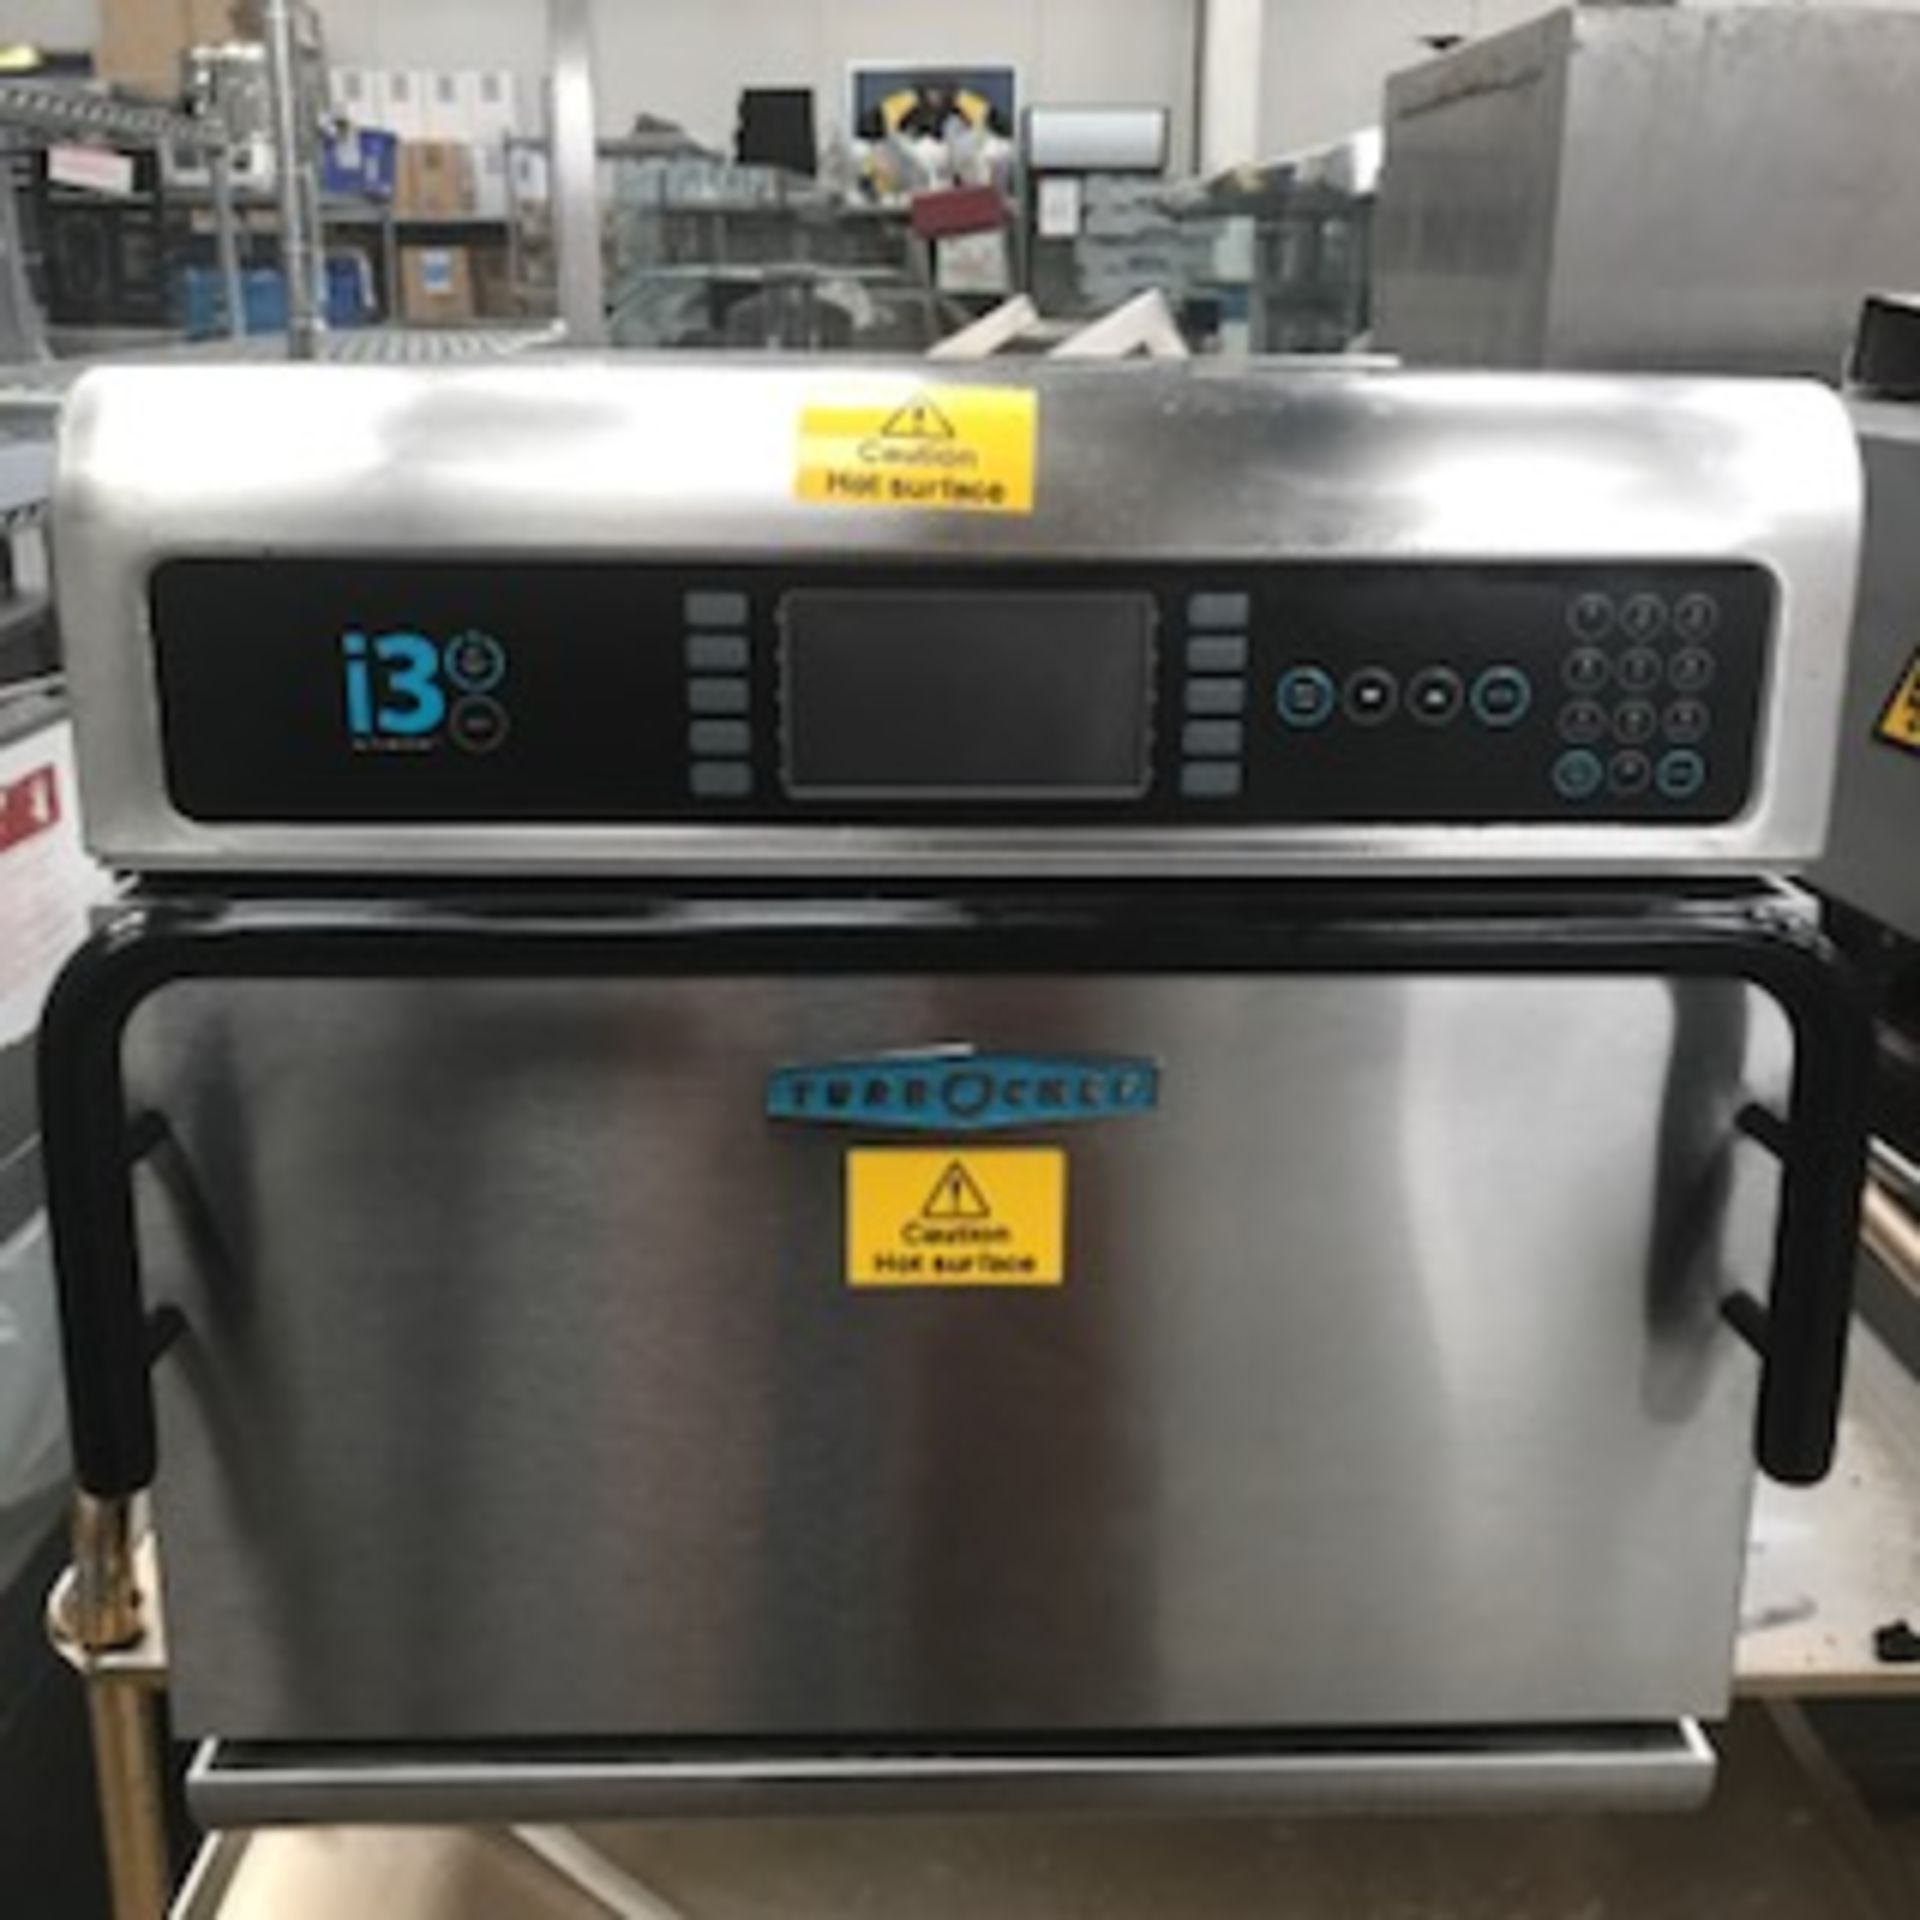 TurboChef I3 TurboChef Electric convection Oven Used but in great condition, prepared and taken care